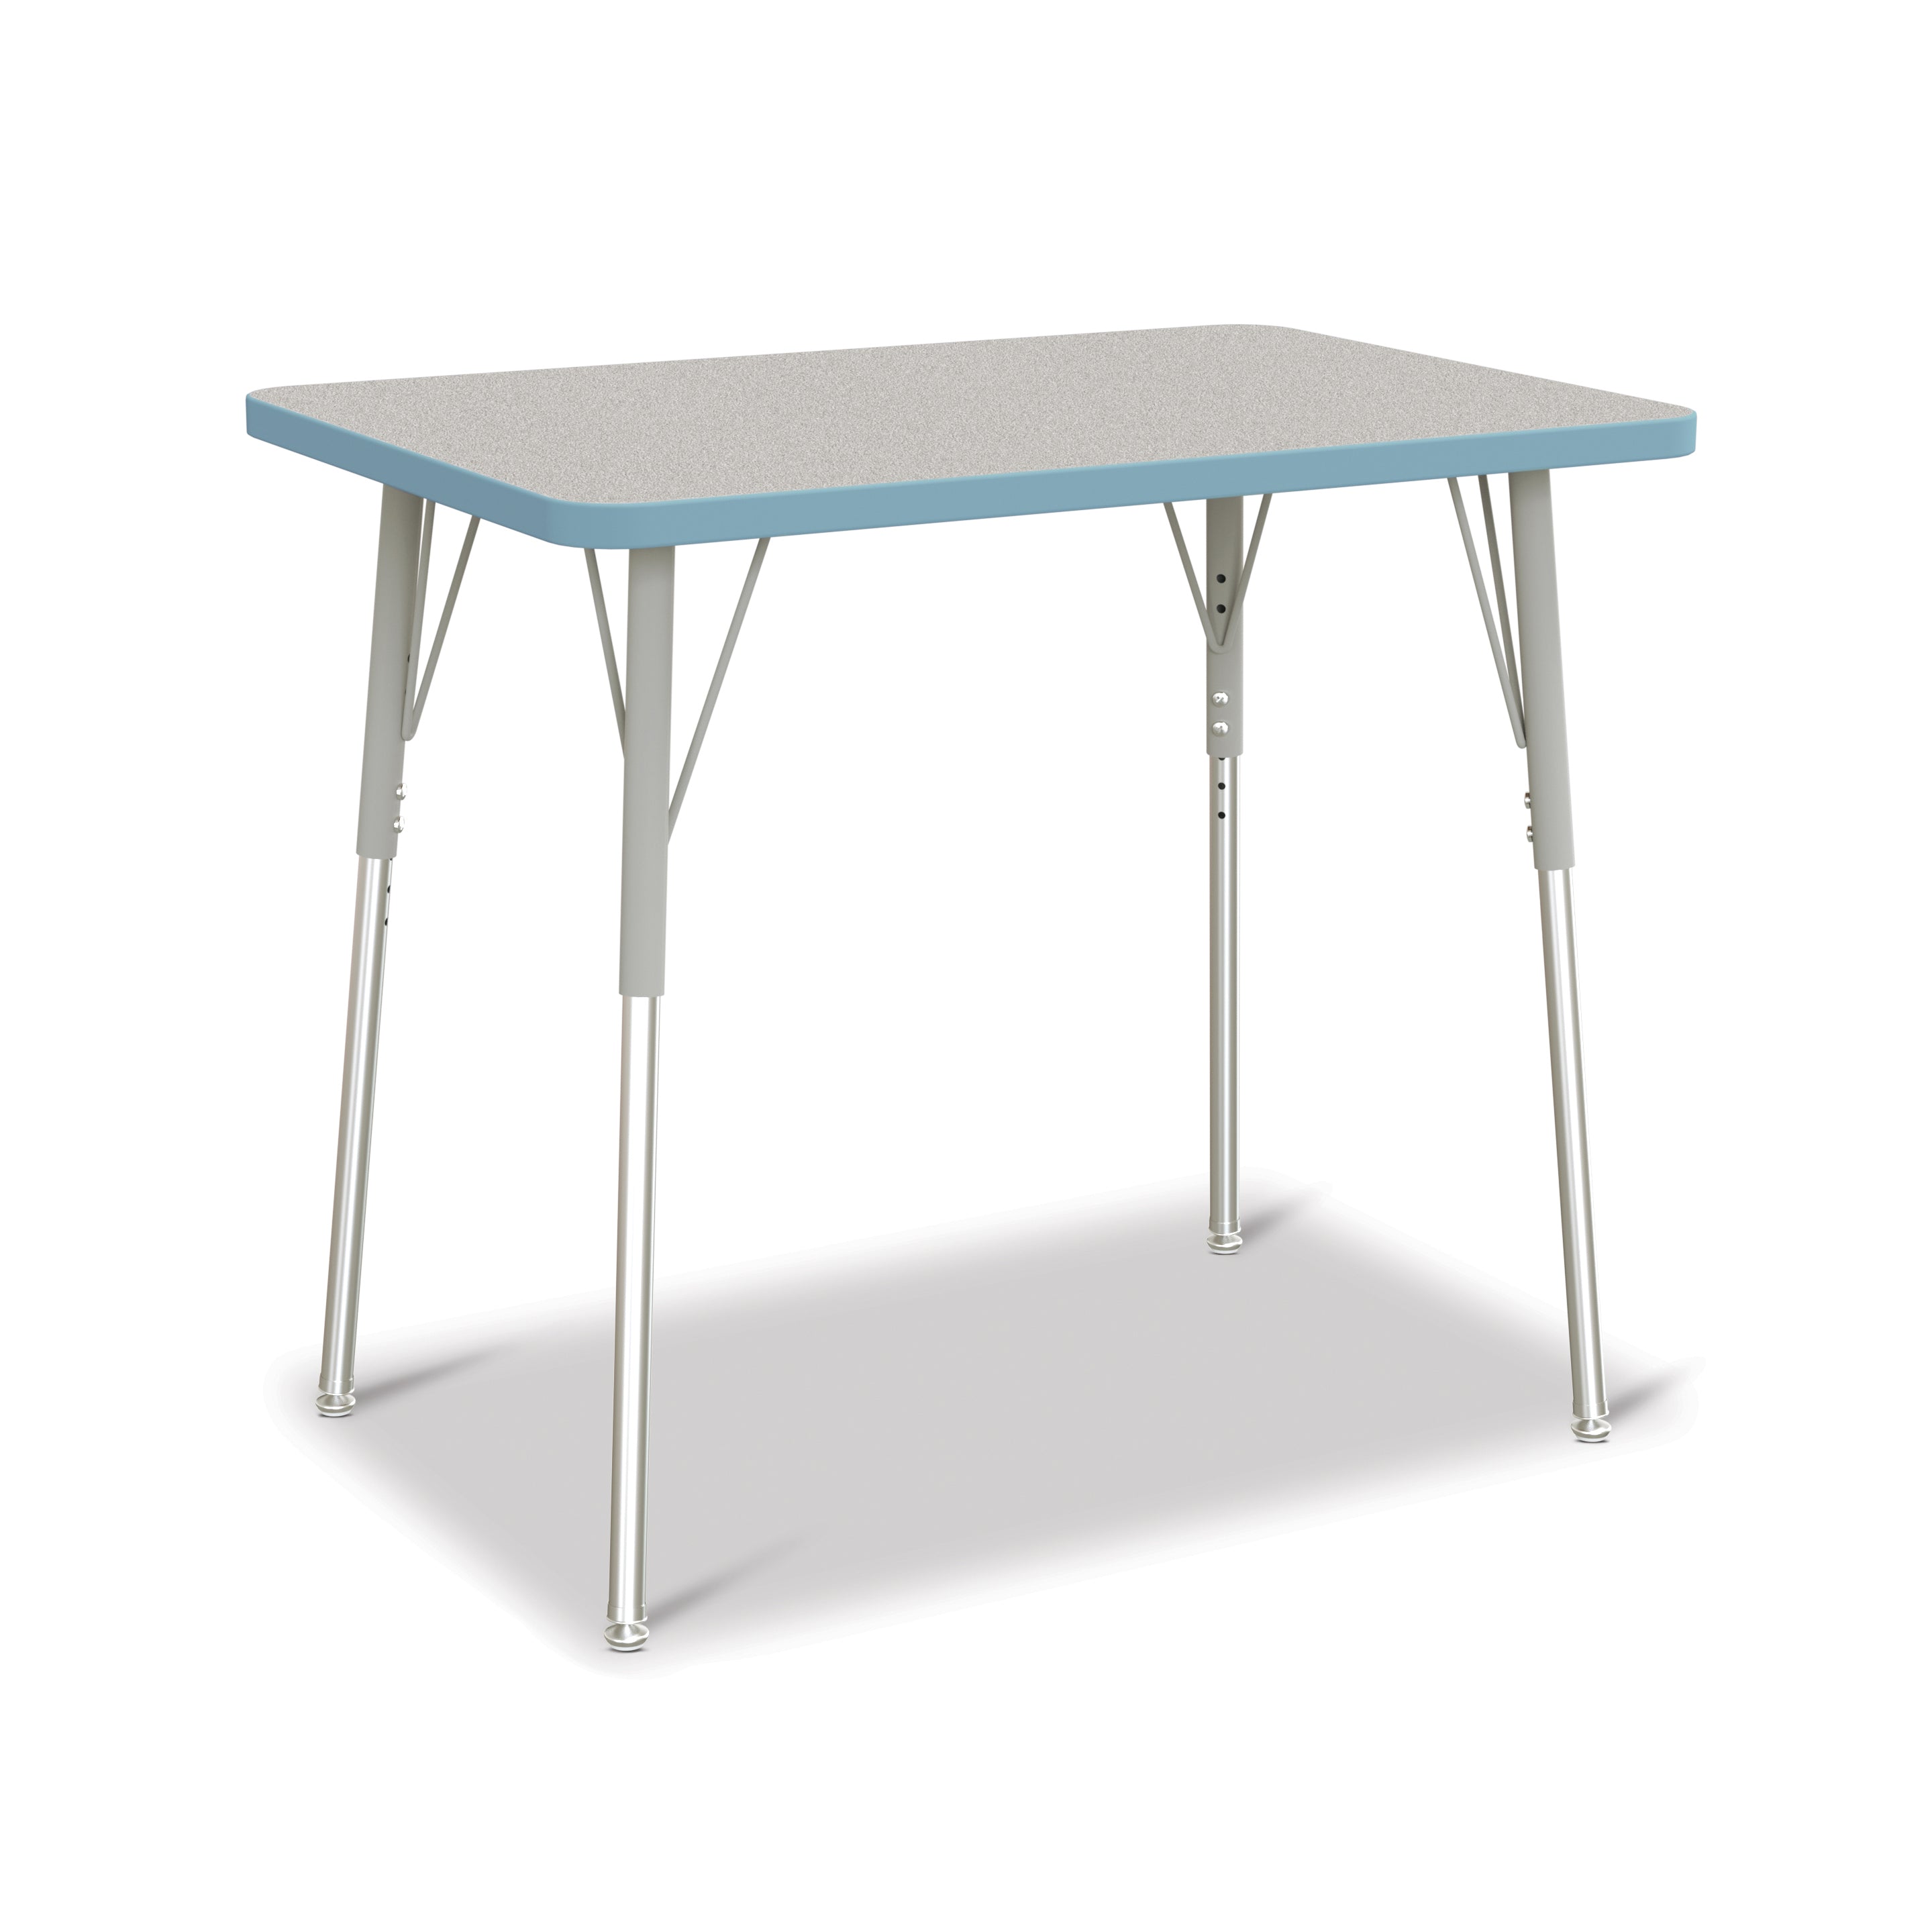 6478JCA131, Berries Rectangle Activity Table - 24" X 36", A-height - Freckled Gray/Coastal Blue/Gray